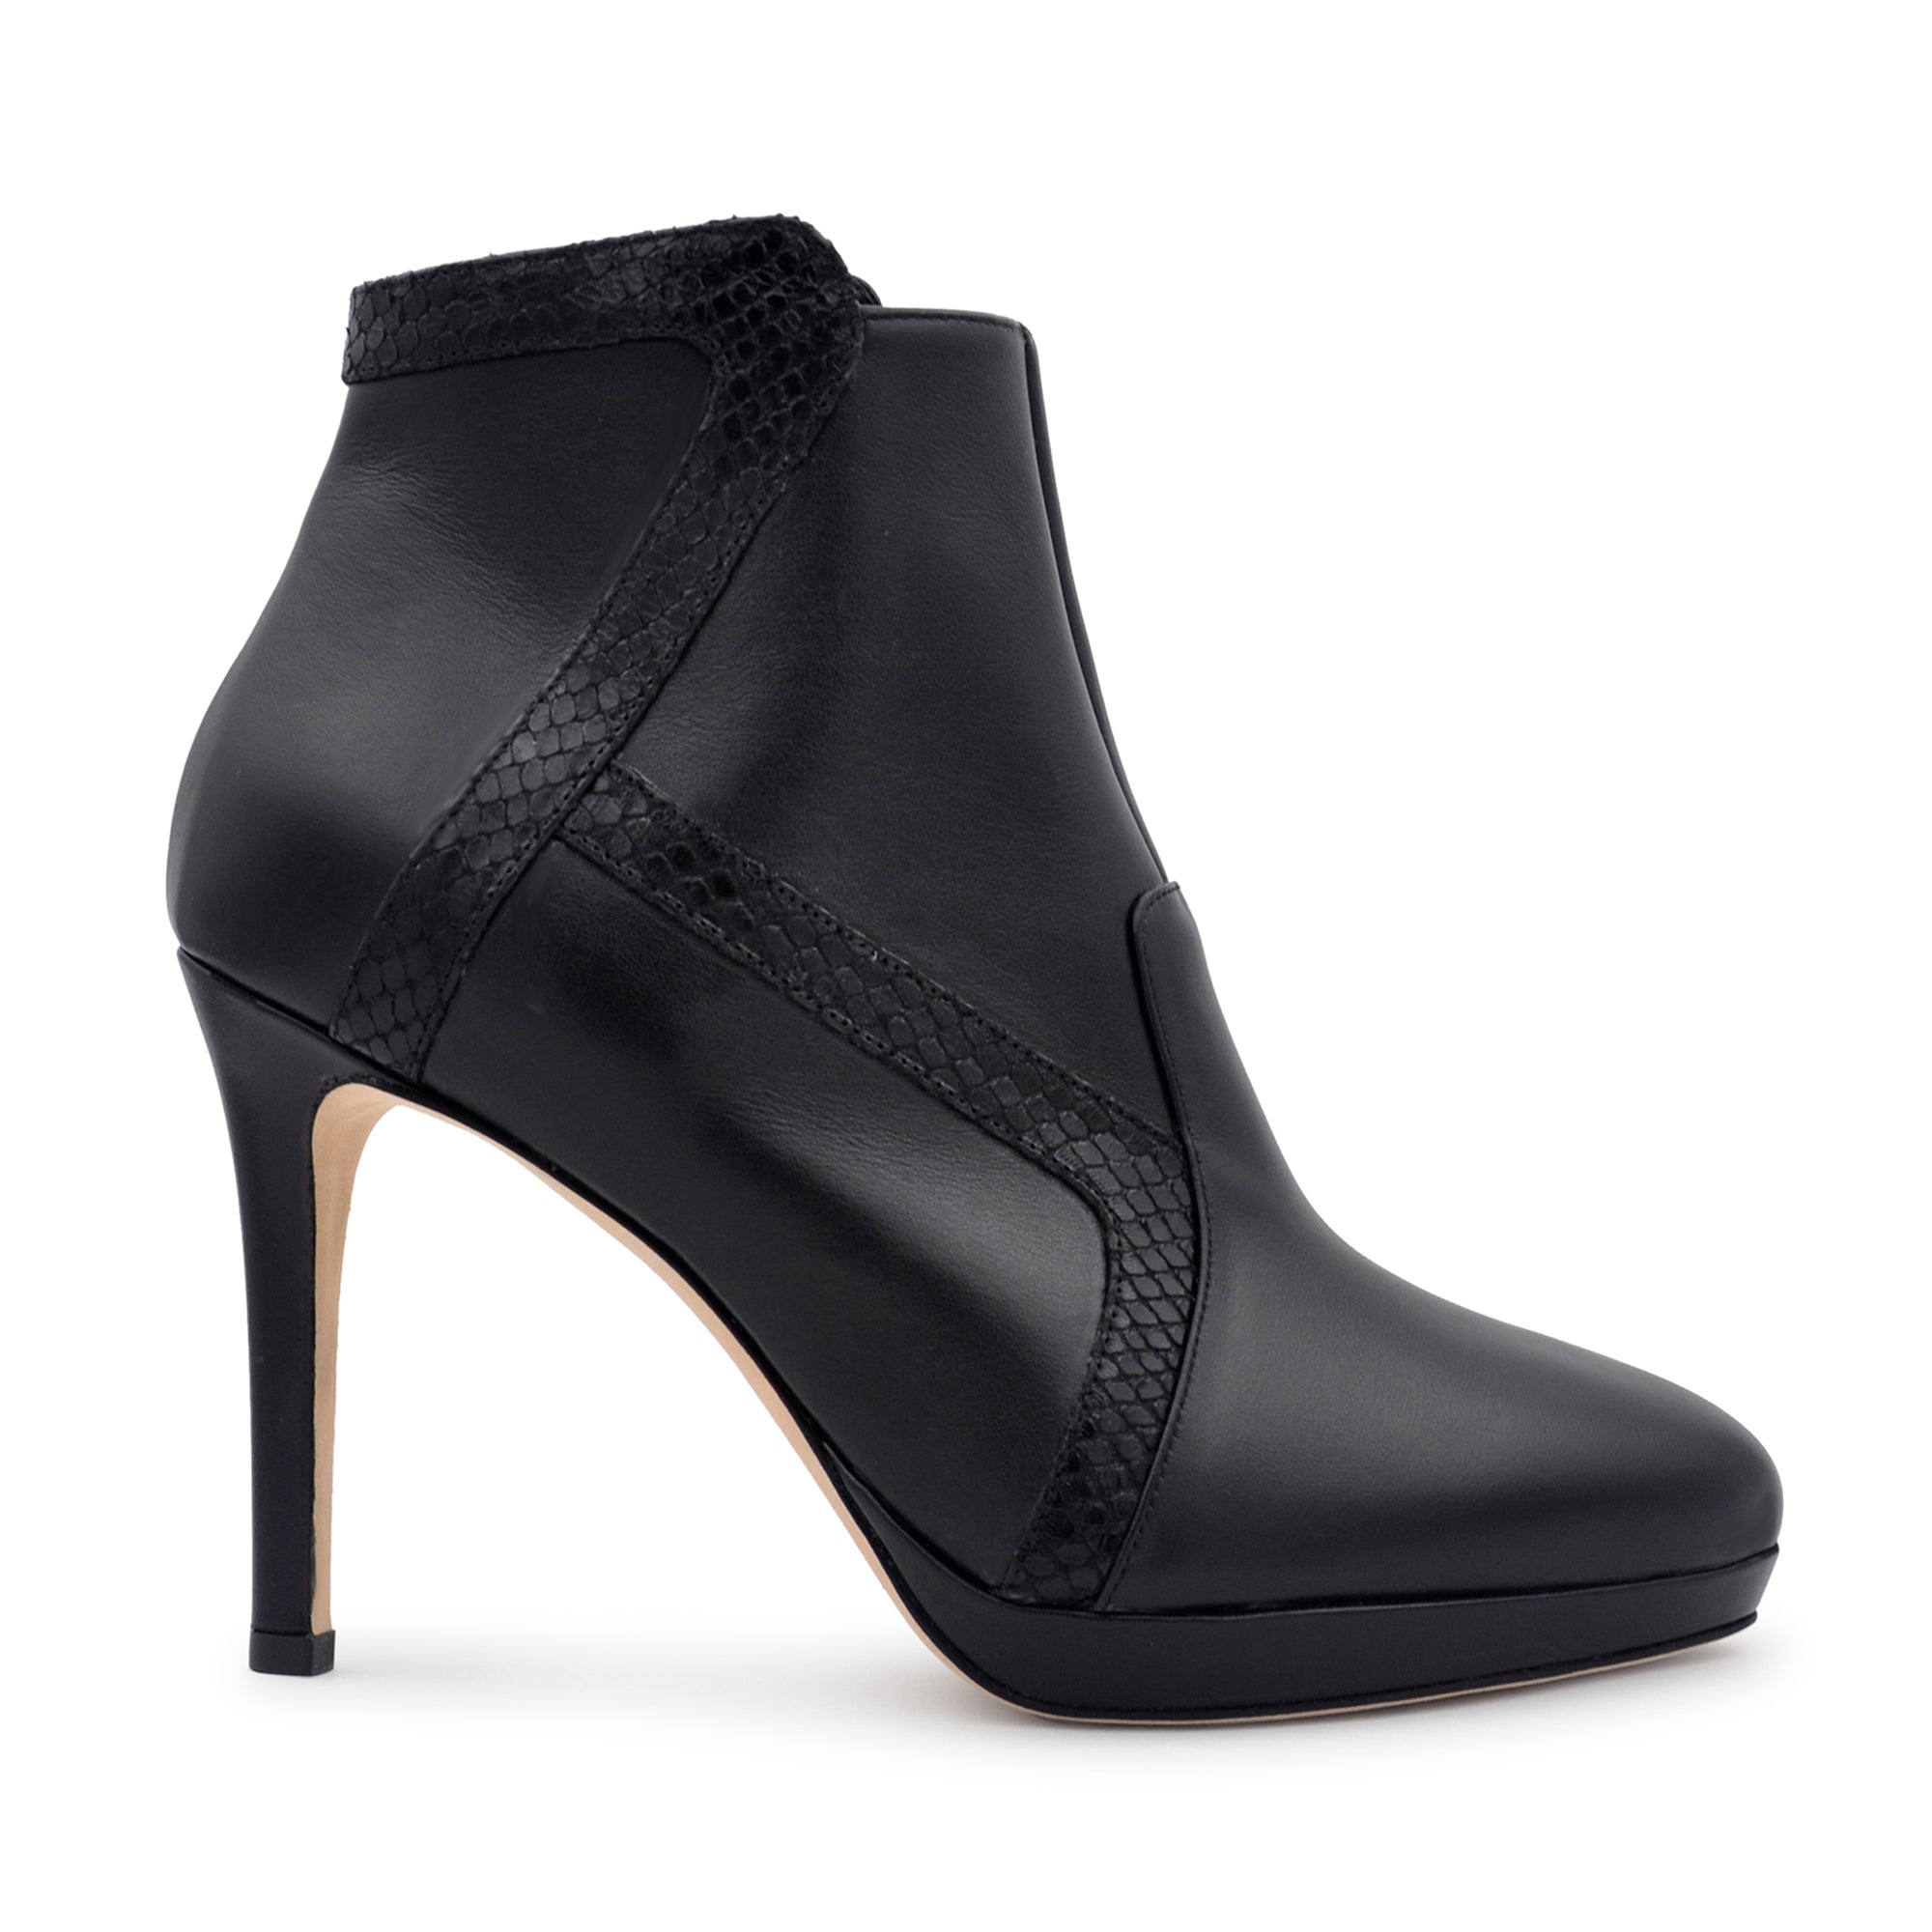 Fiore Collection Black Heeled Ankle Boots UK 6 Preloved | Oxfam Shop